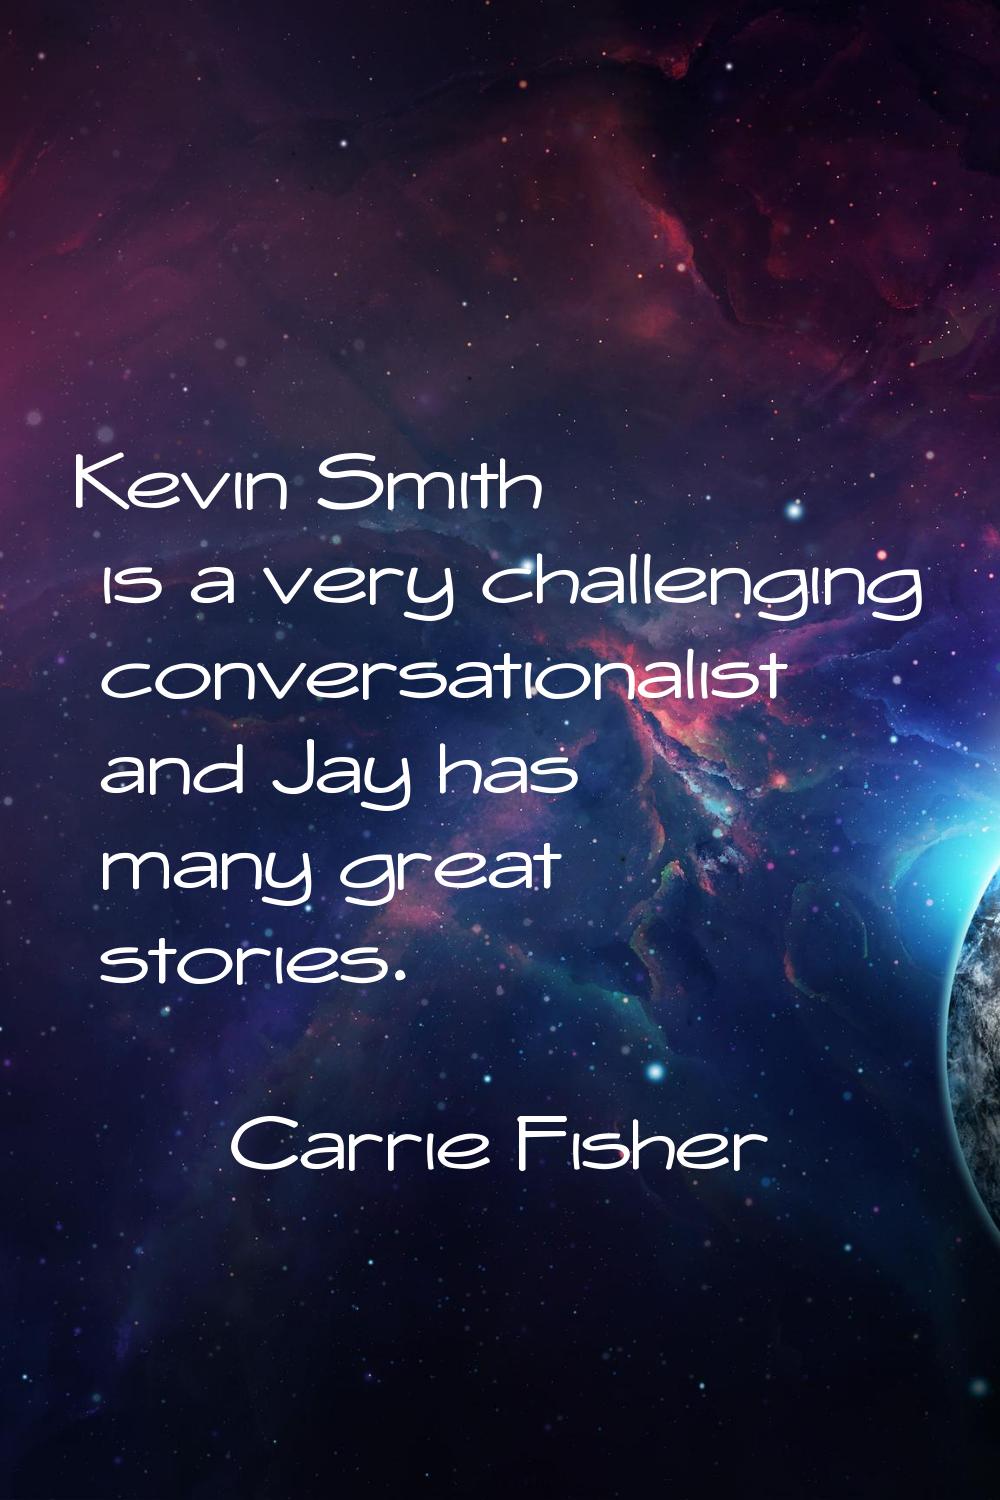 Kevin Smith is a very challenging conversationalist and Jay has many great stories.